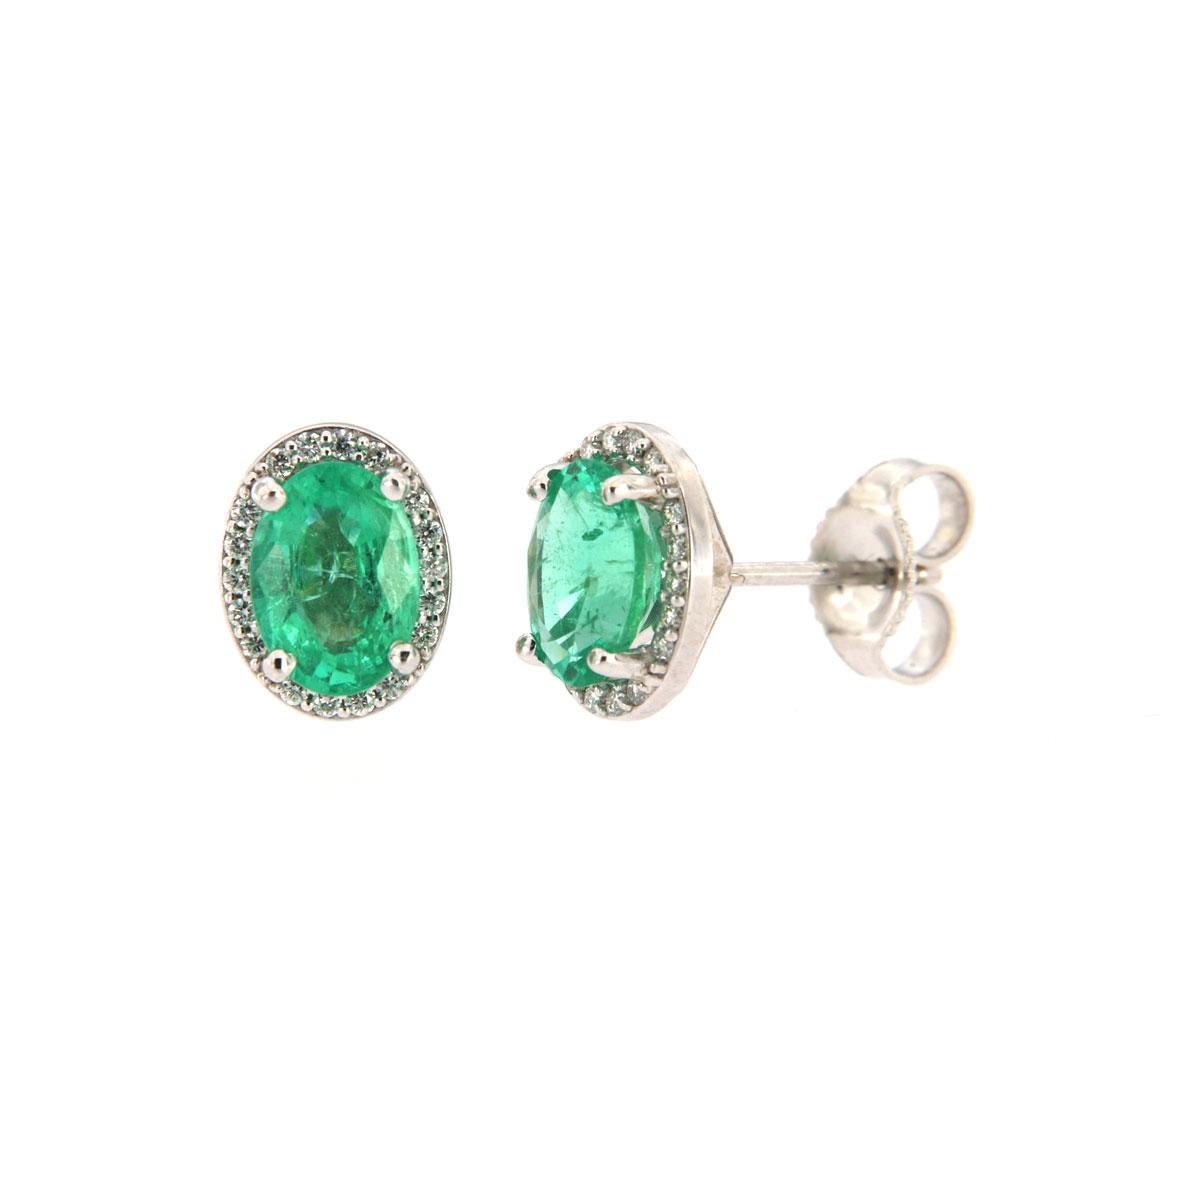 These classic stud earrings feature a 1.50-carat total weight of Oval Shape Green Emerald in Exceptional quality surrounded by a halo of full-cut diamonds

Product details: 

Center Gemstone Type: Emerald
Center Gemstone Carat Weight: 1.5
Center